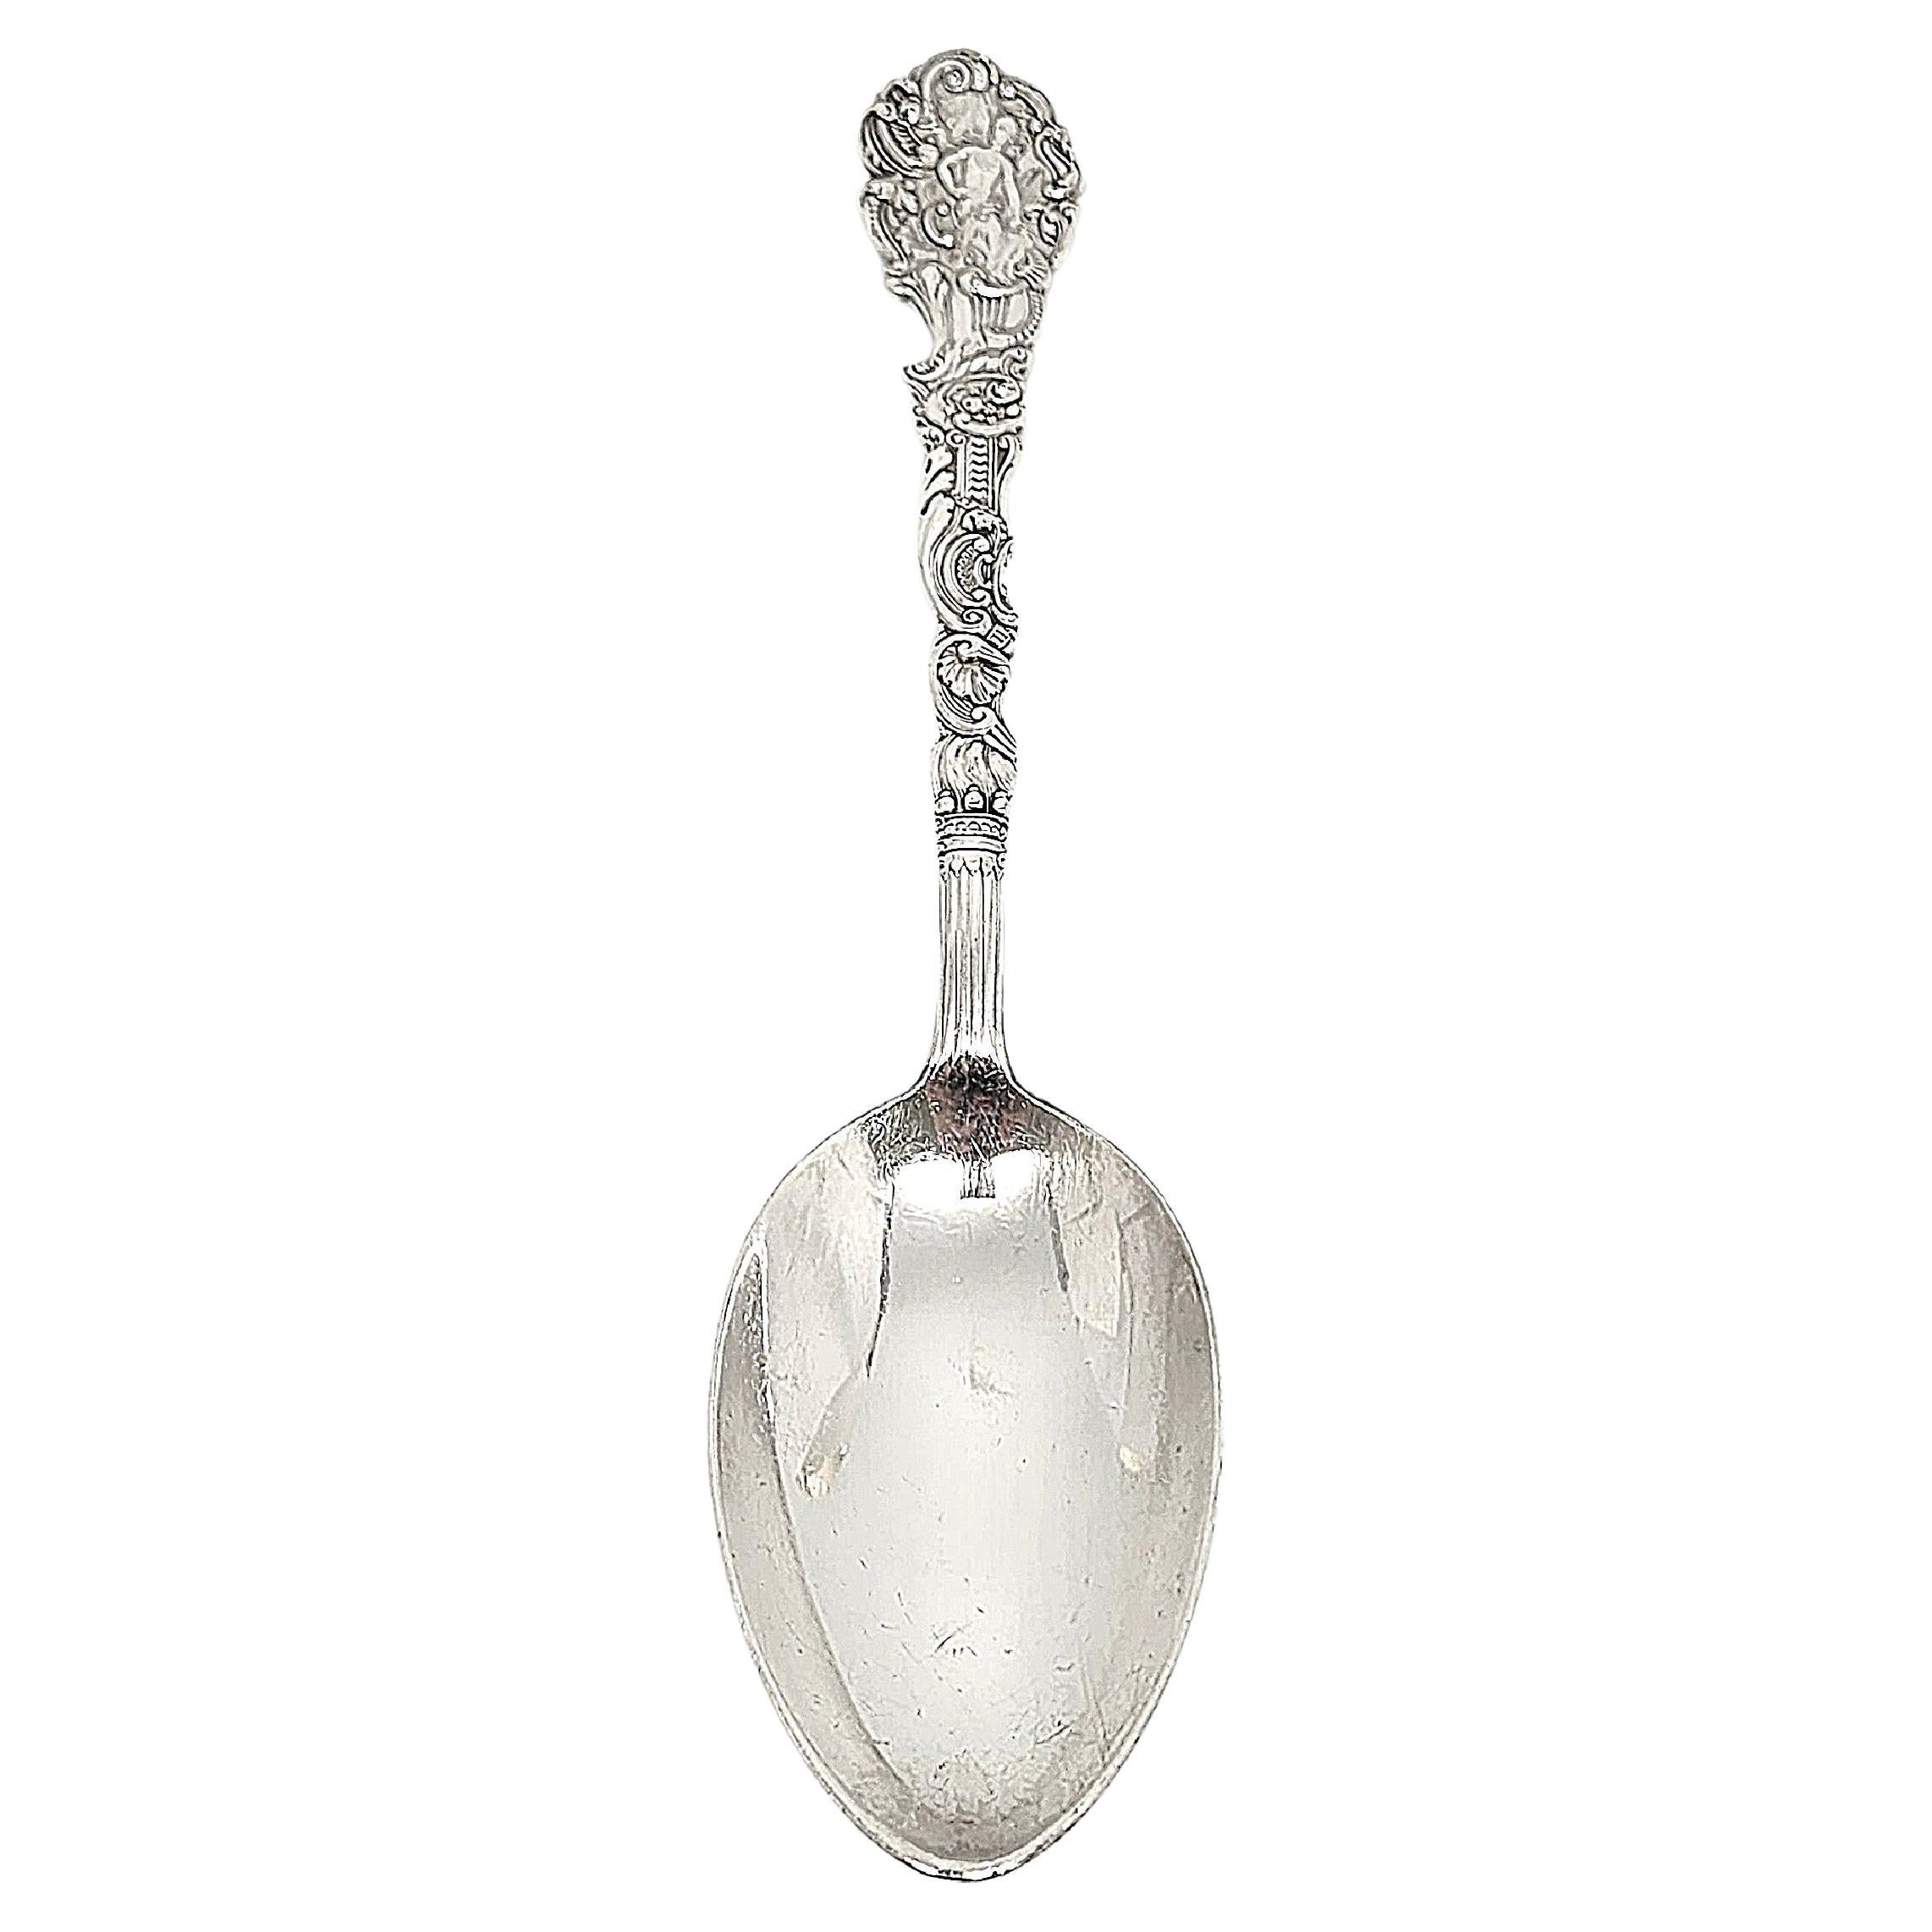 Gorham Versailles Sterling Silver Tablespoon Serving Spoon